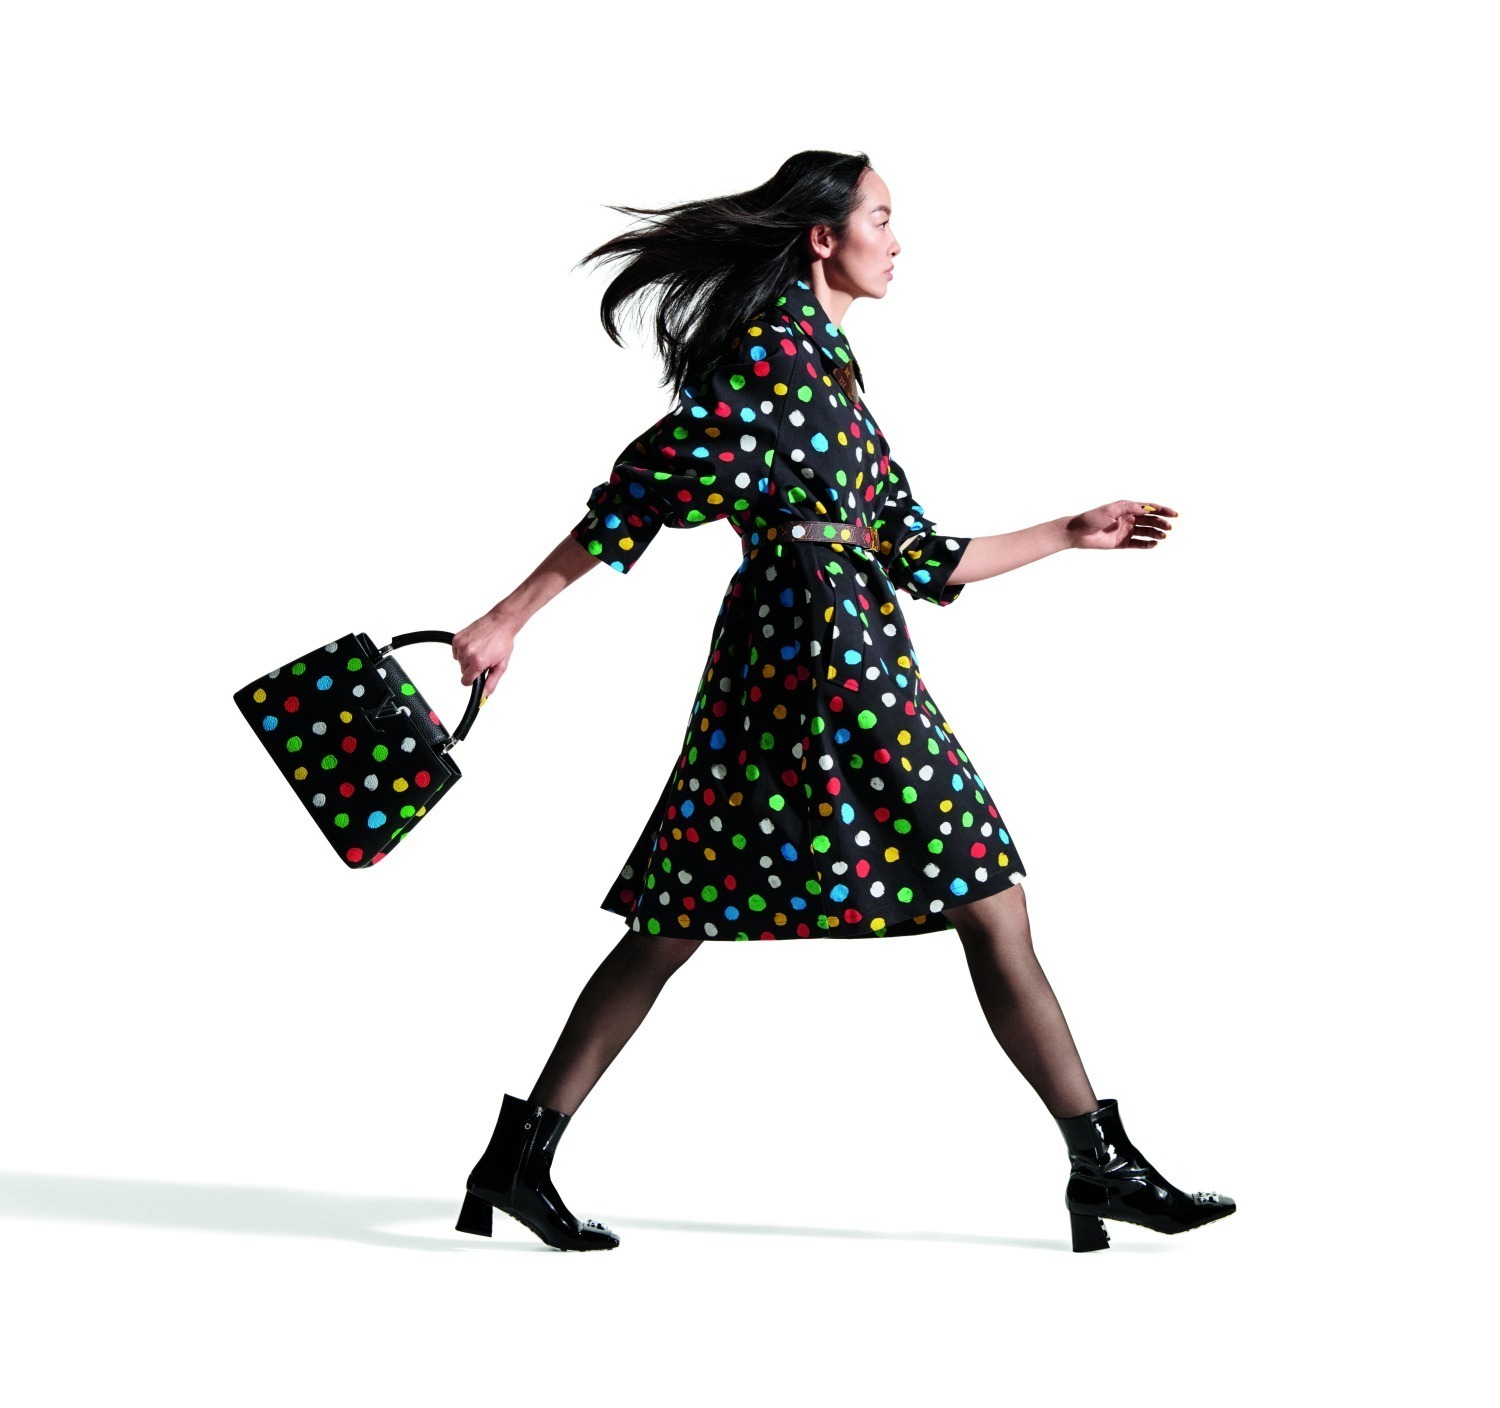 The Second Louis Vuitton x Yayoi Kusama Collab Is Finally Here & Wow